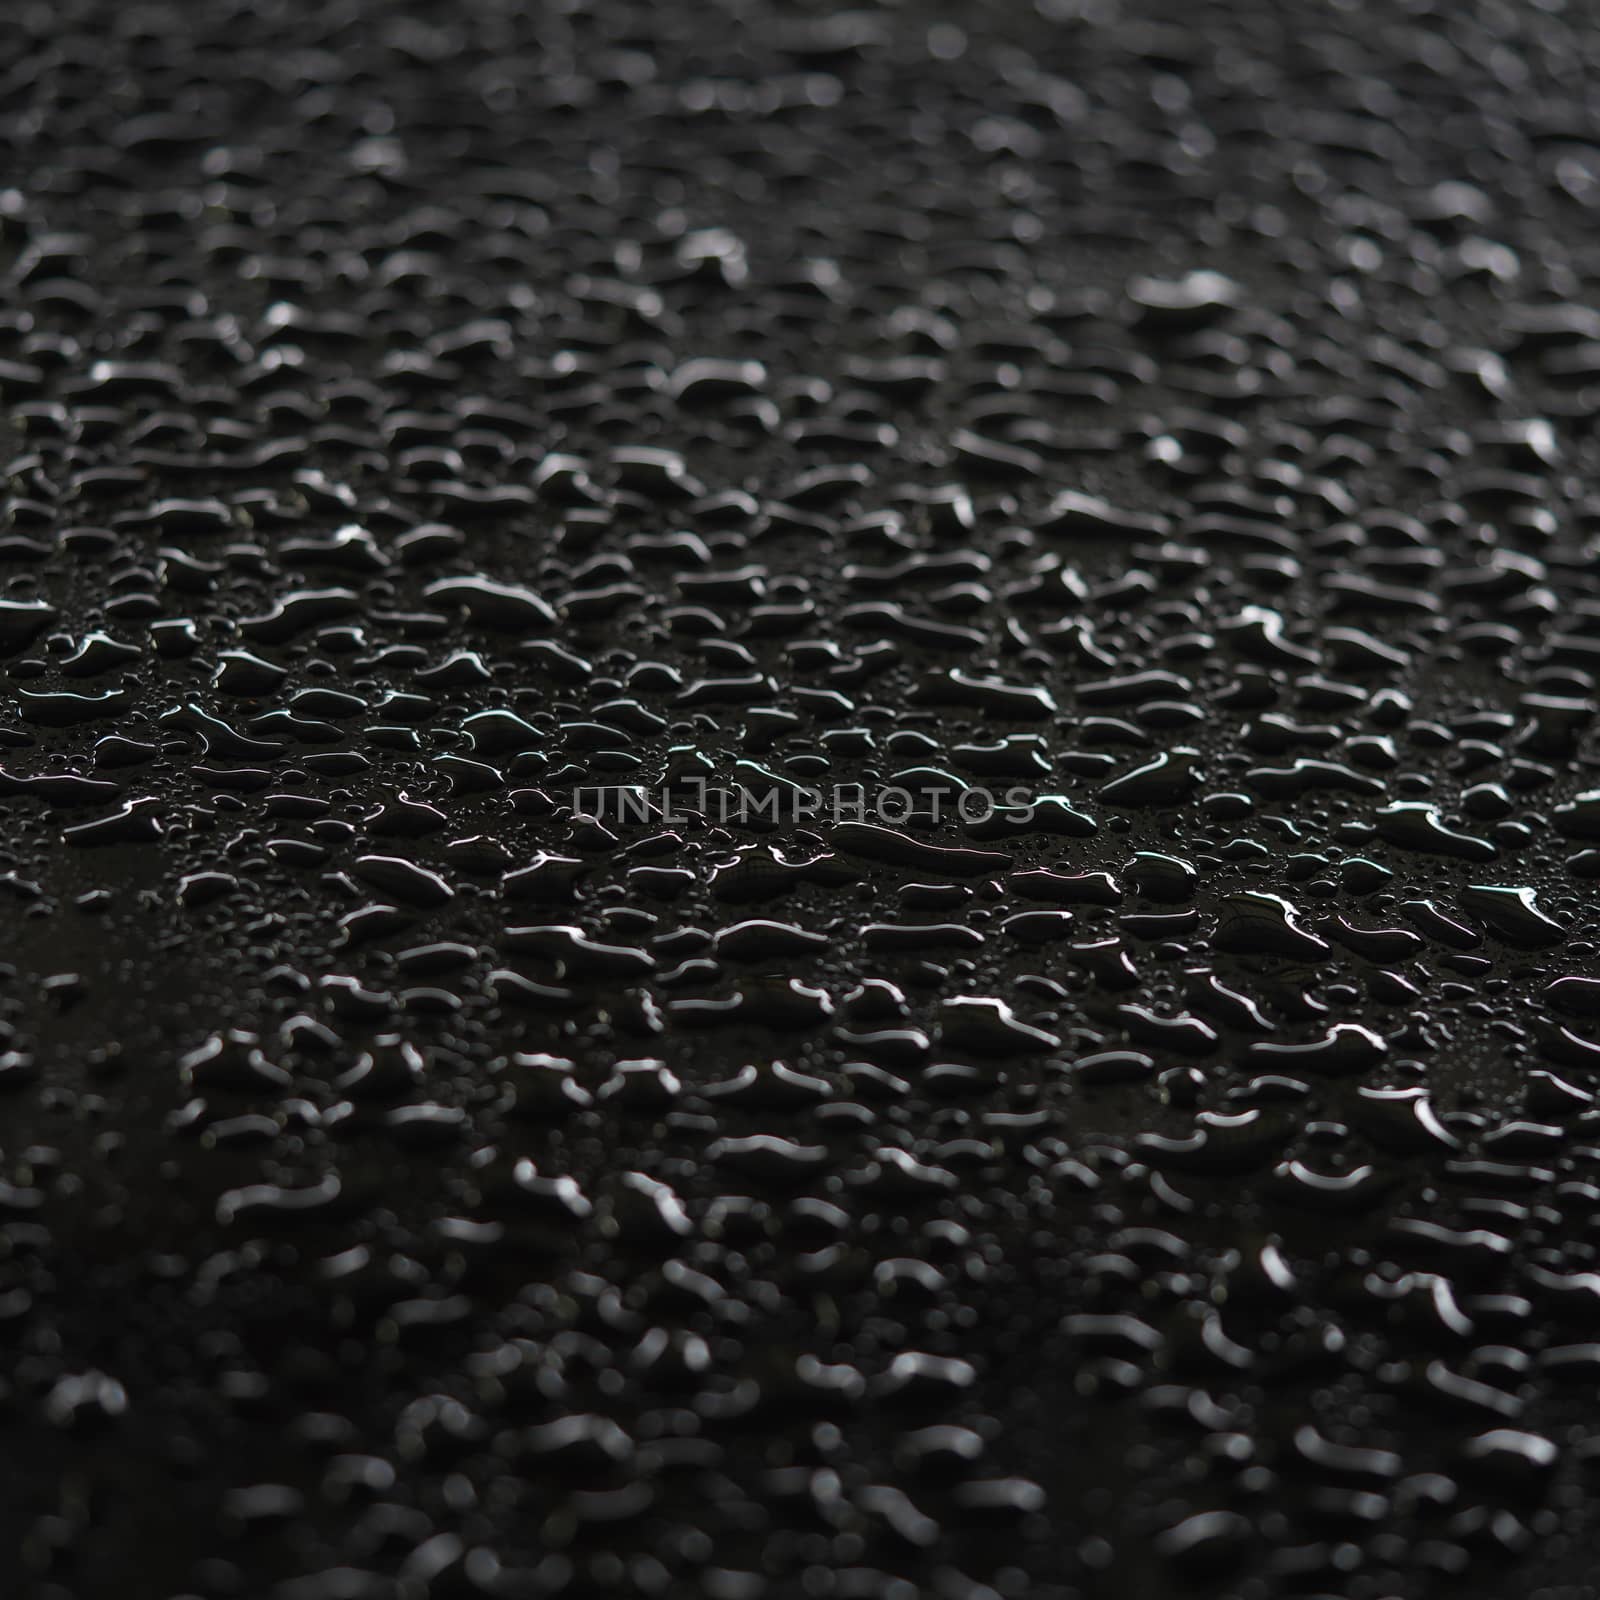 Abstract raindrops clinging to the surface of the car, black bac by noppha80